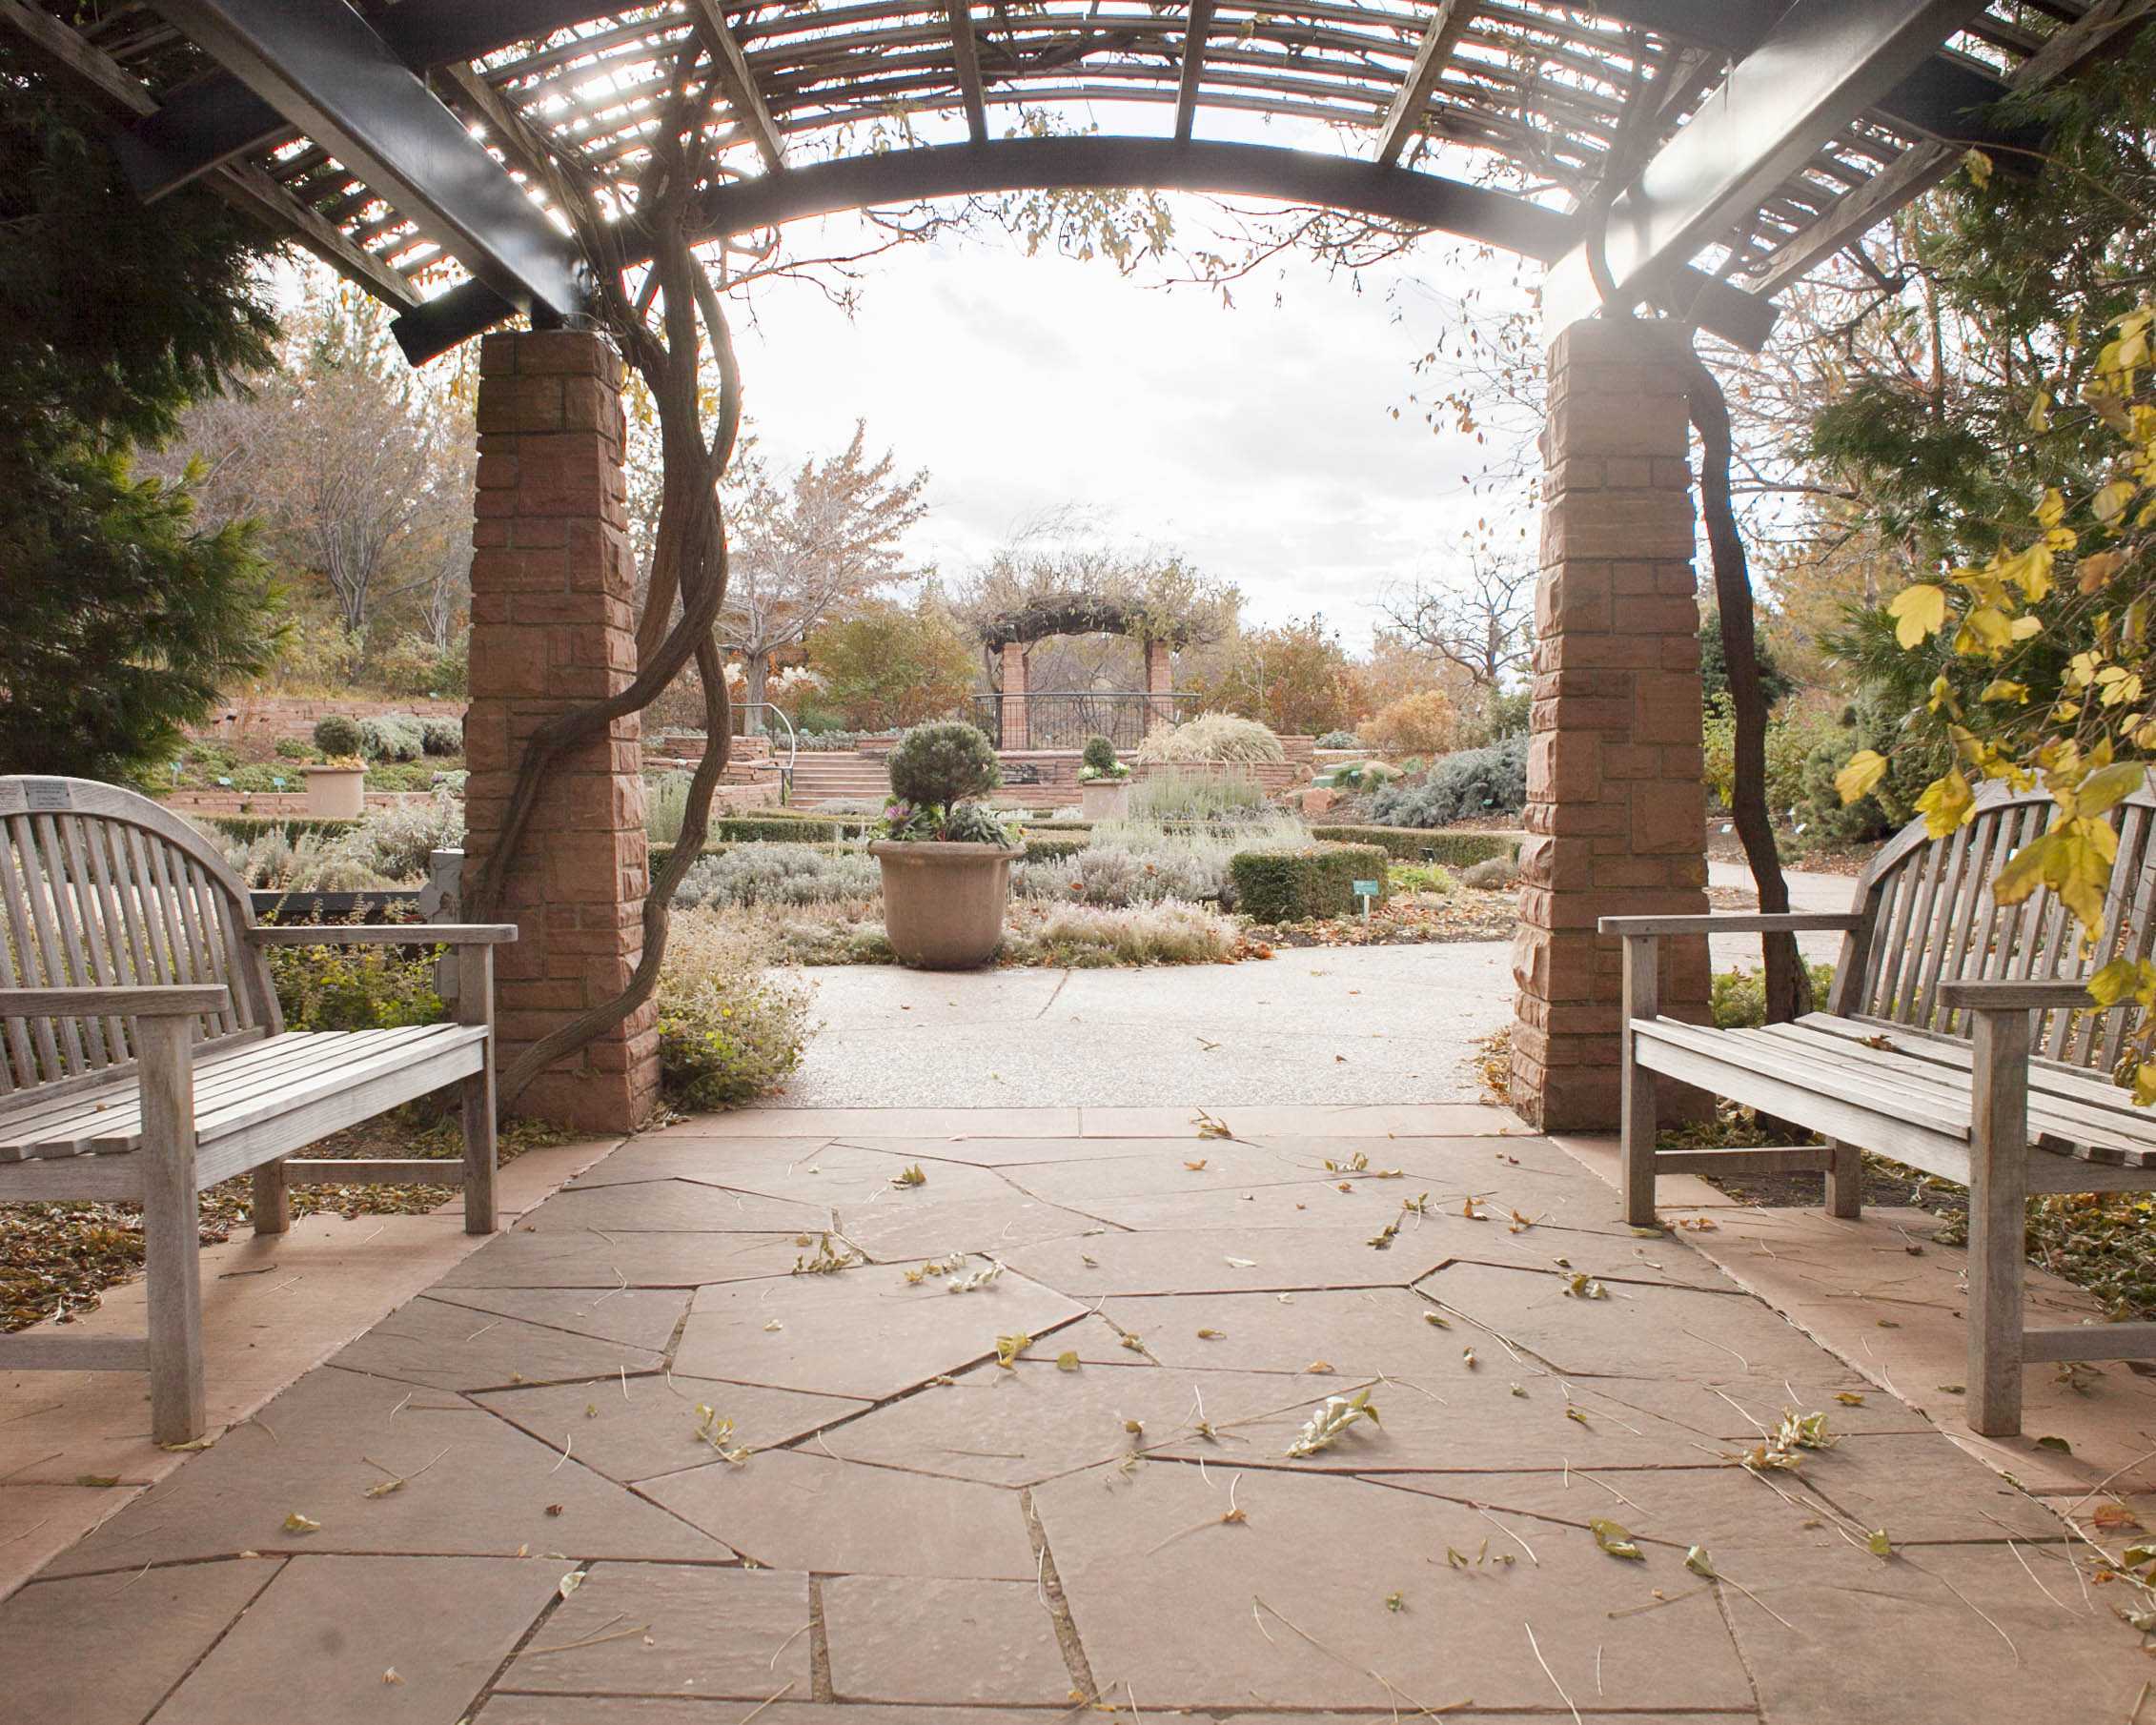 Beauty, Solitude of Red Butte Gardens Worth Braving the Winter Weather